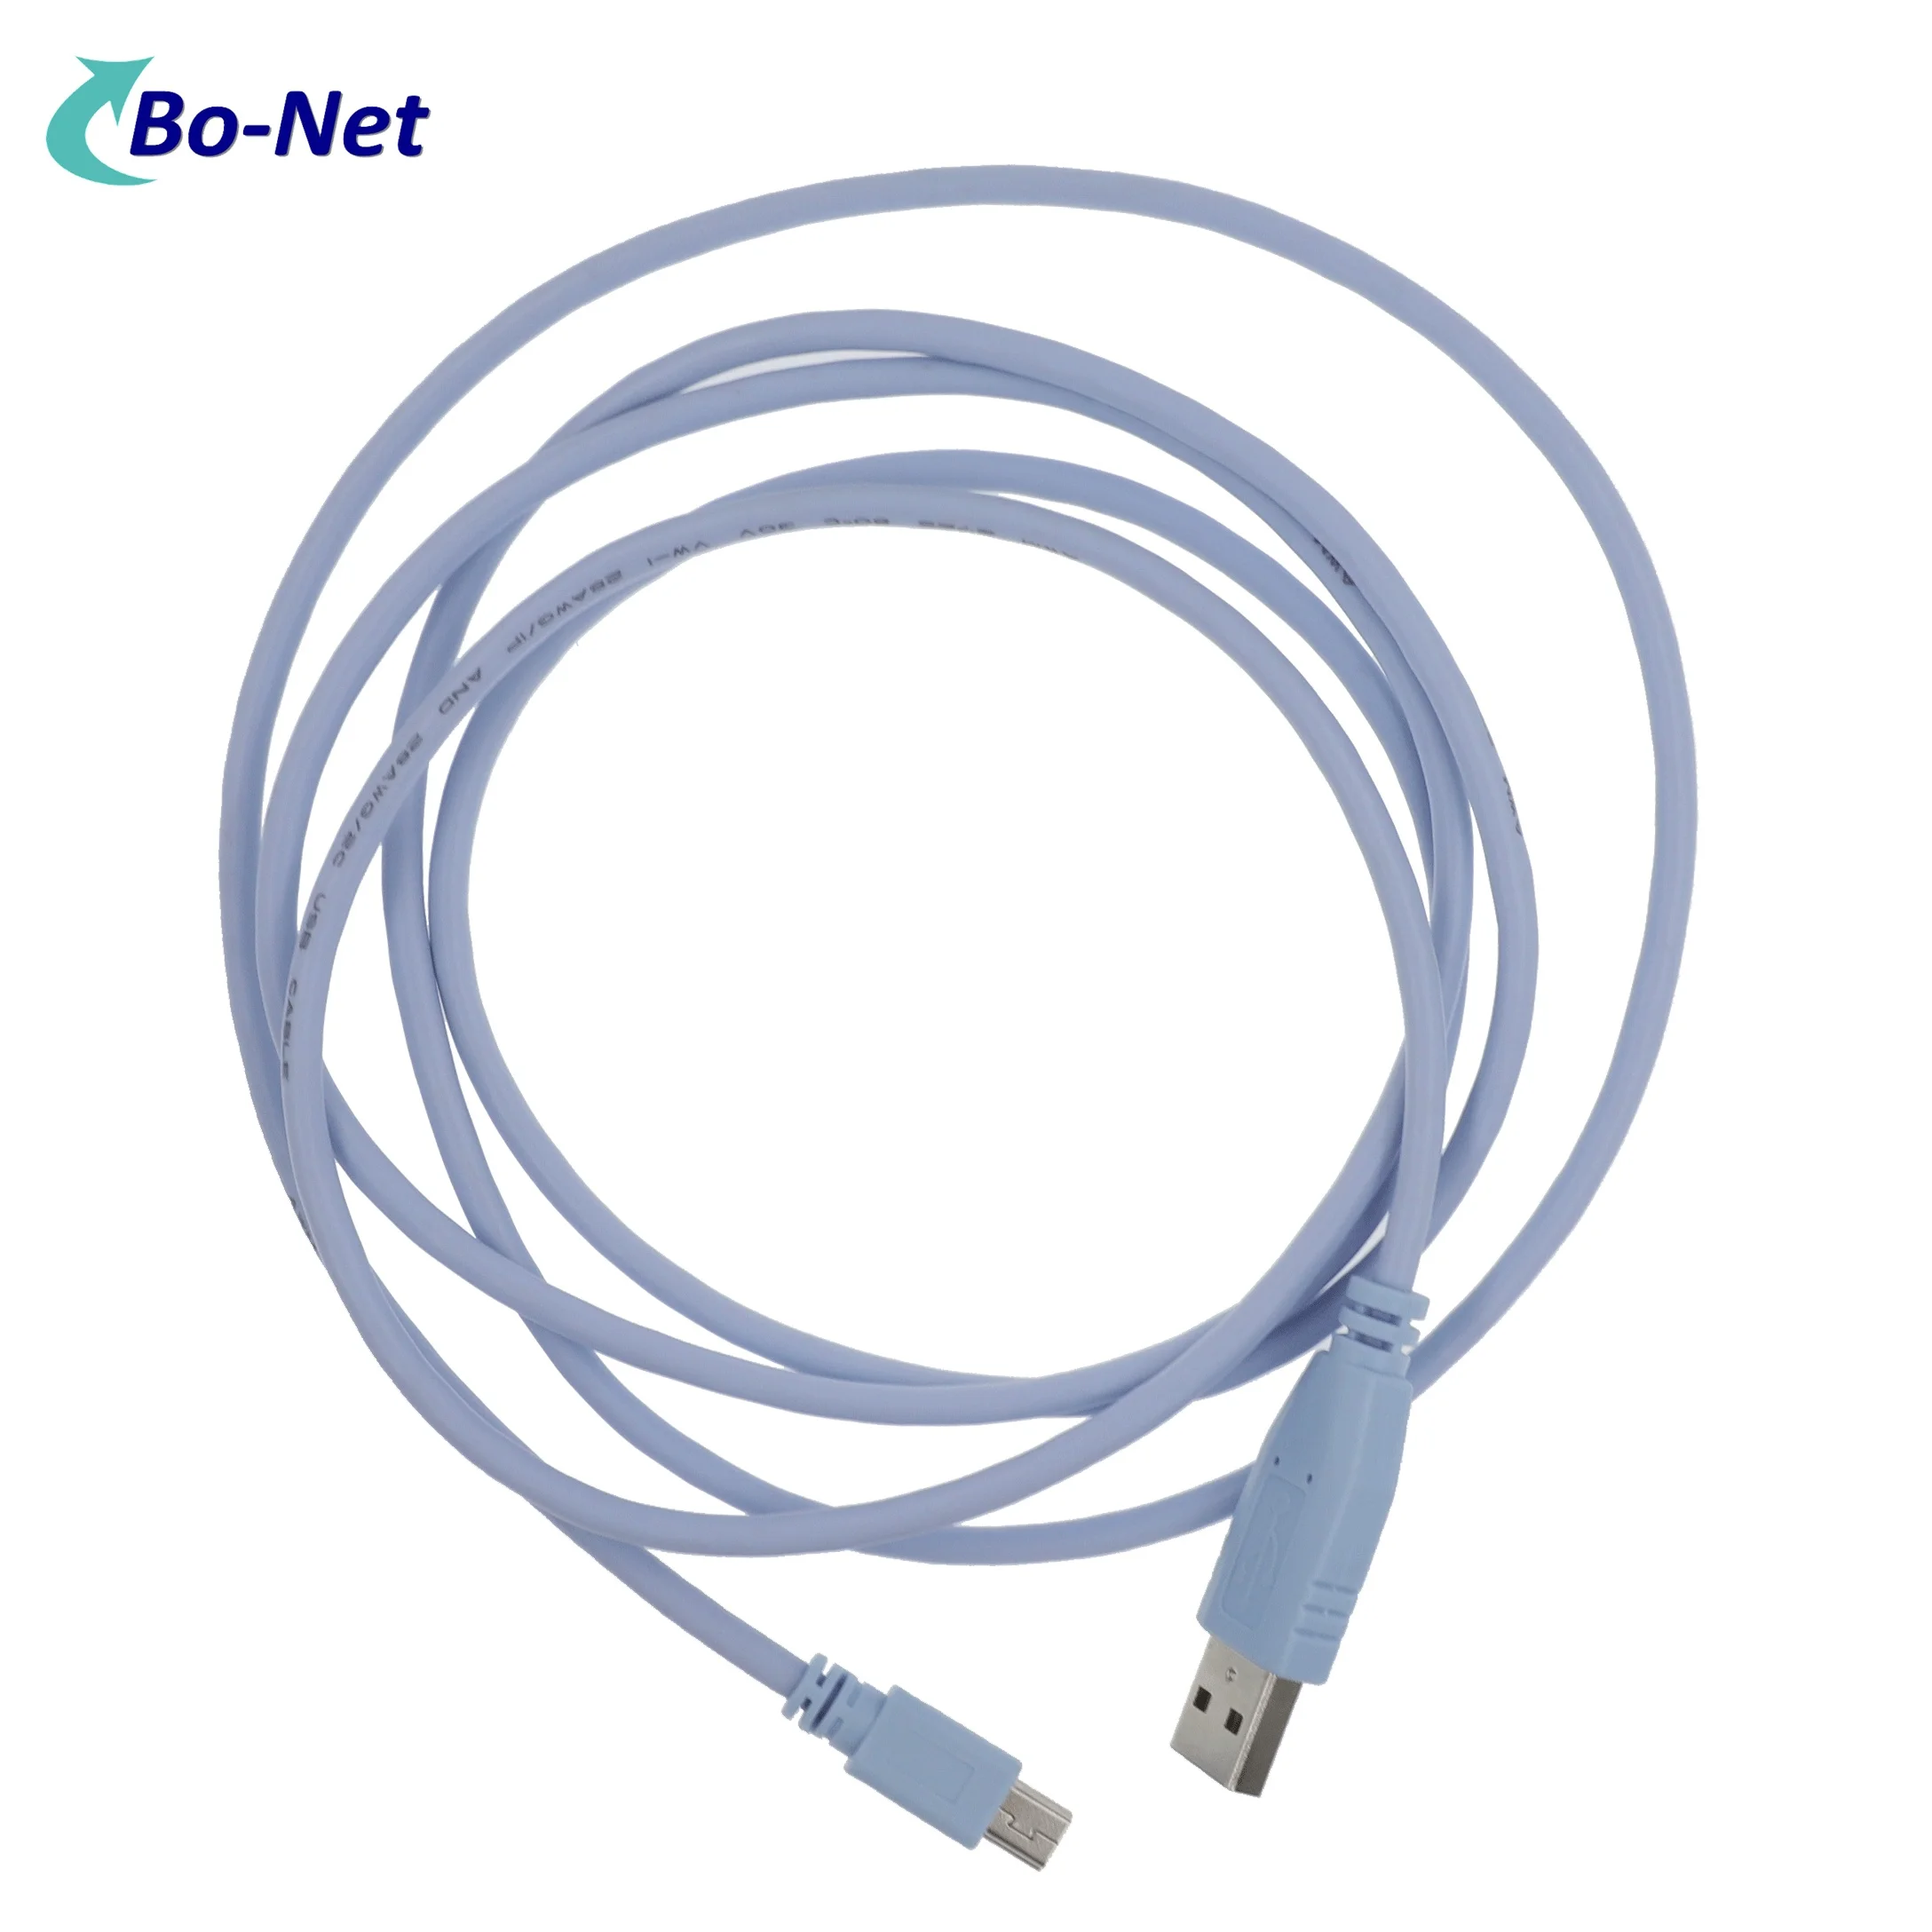 Source CAB-CONSOLE-USB USB Cable to Mini 1.8Meter 6Ft Light Blue Config Control Router Switch on m.alibaba.com